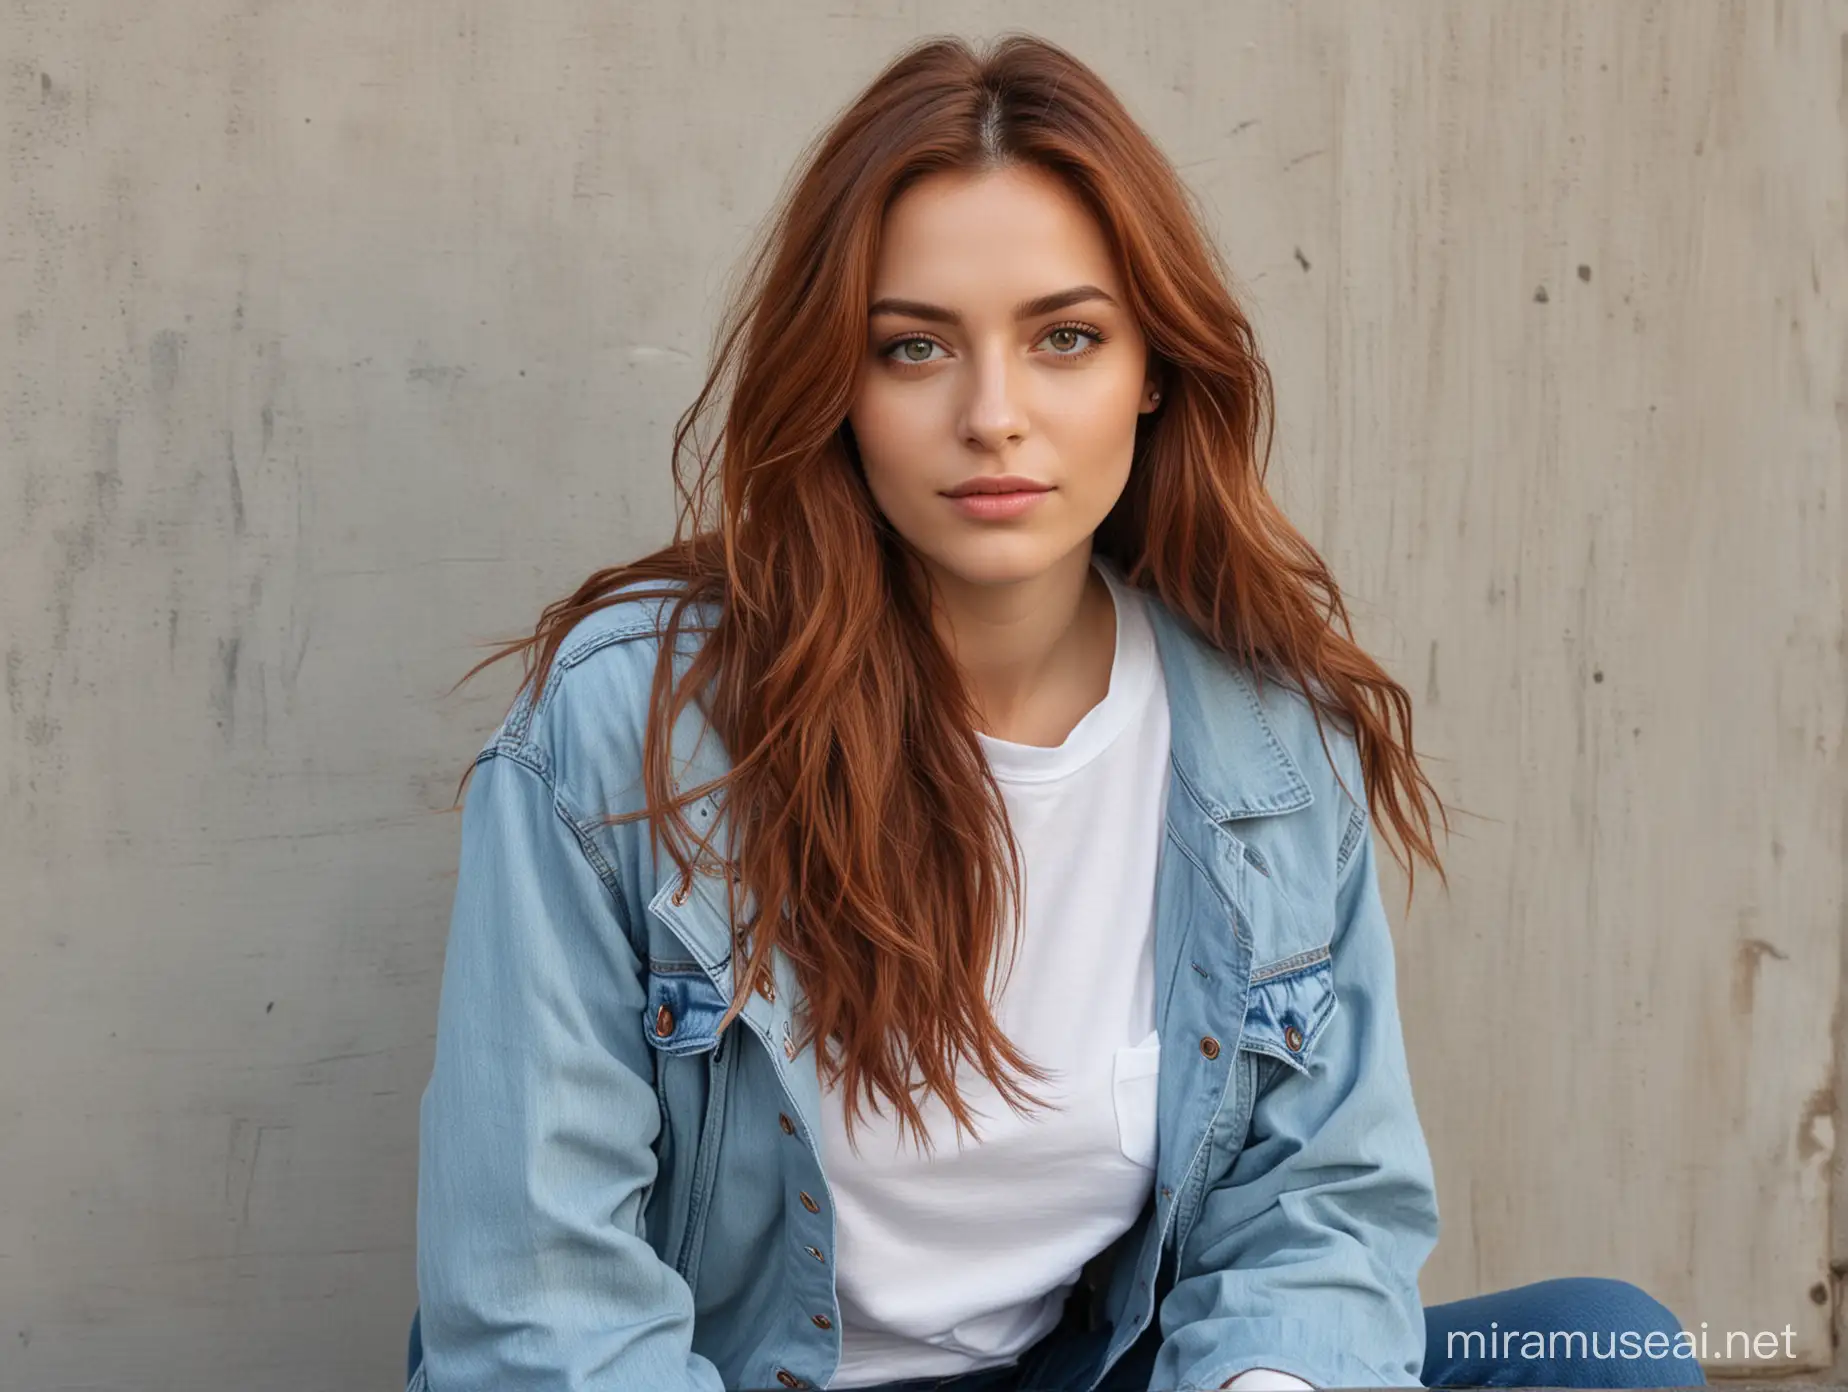 Stylish Woman with Cascading Chestnut Hair and Amber Eyes in Casual Attire